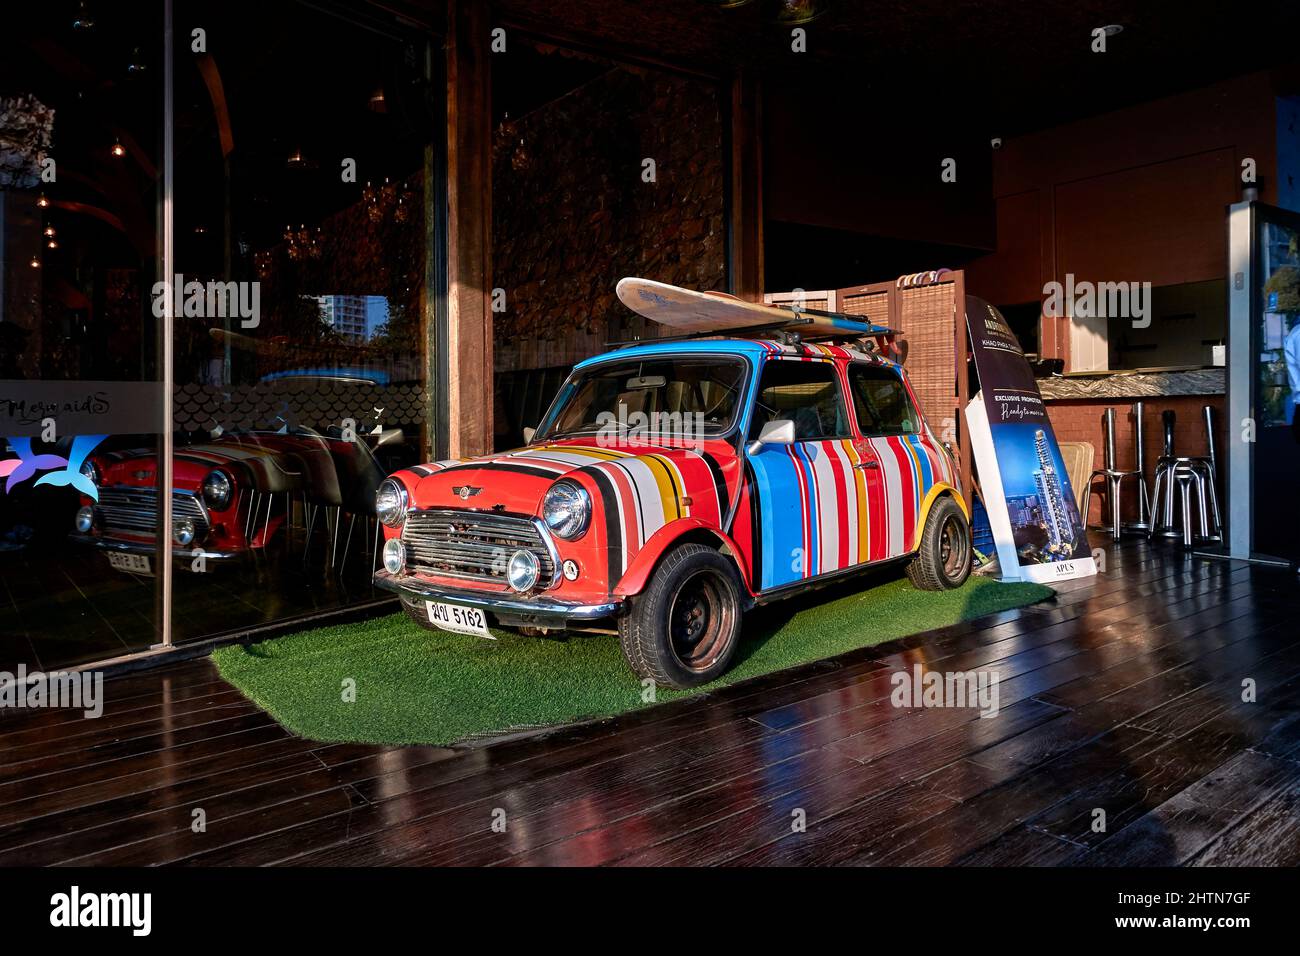 Paul Smith Mini High Resolution Stock Photography and Images - Alamy